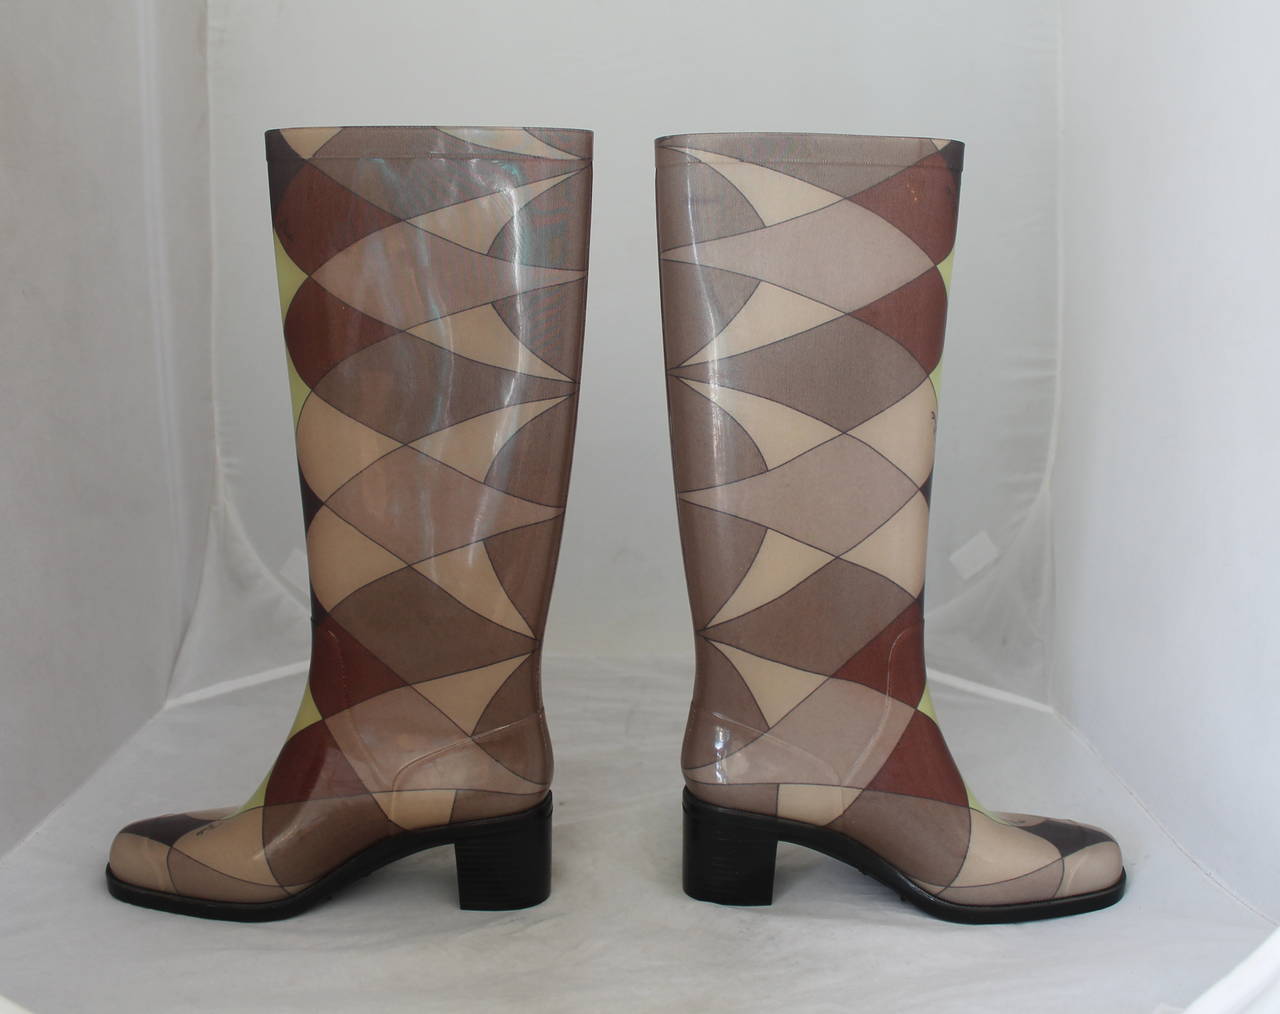 Emilio Pucci Brown & Green Printed Plastic Rain Boots with Box - 37. These boots are in good condition with some use on the outside. The bottom of the shoe is in very good shape but the box is not brand new.